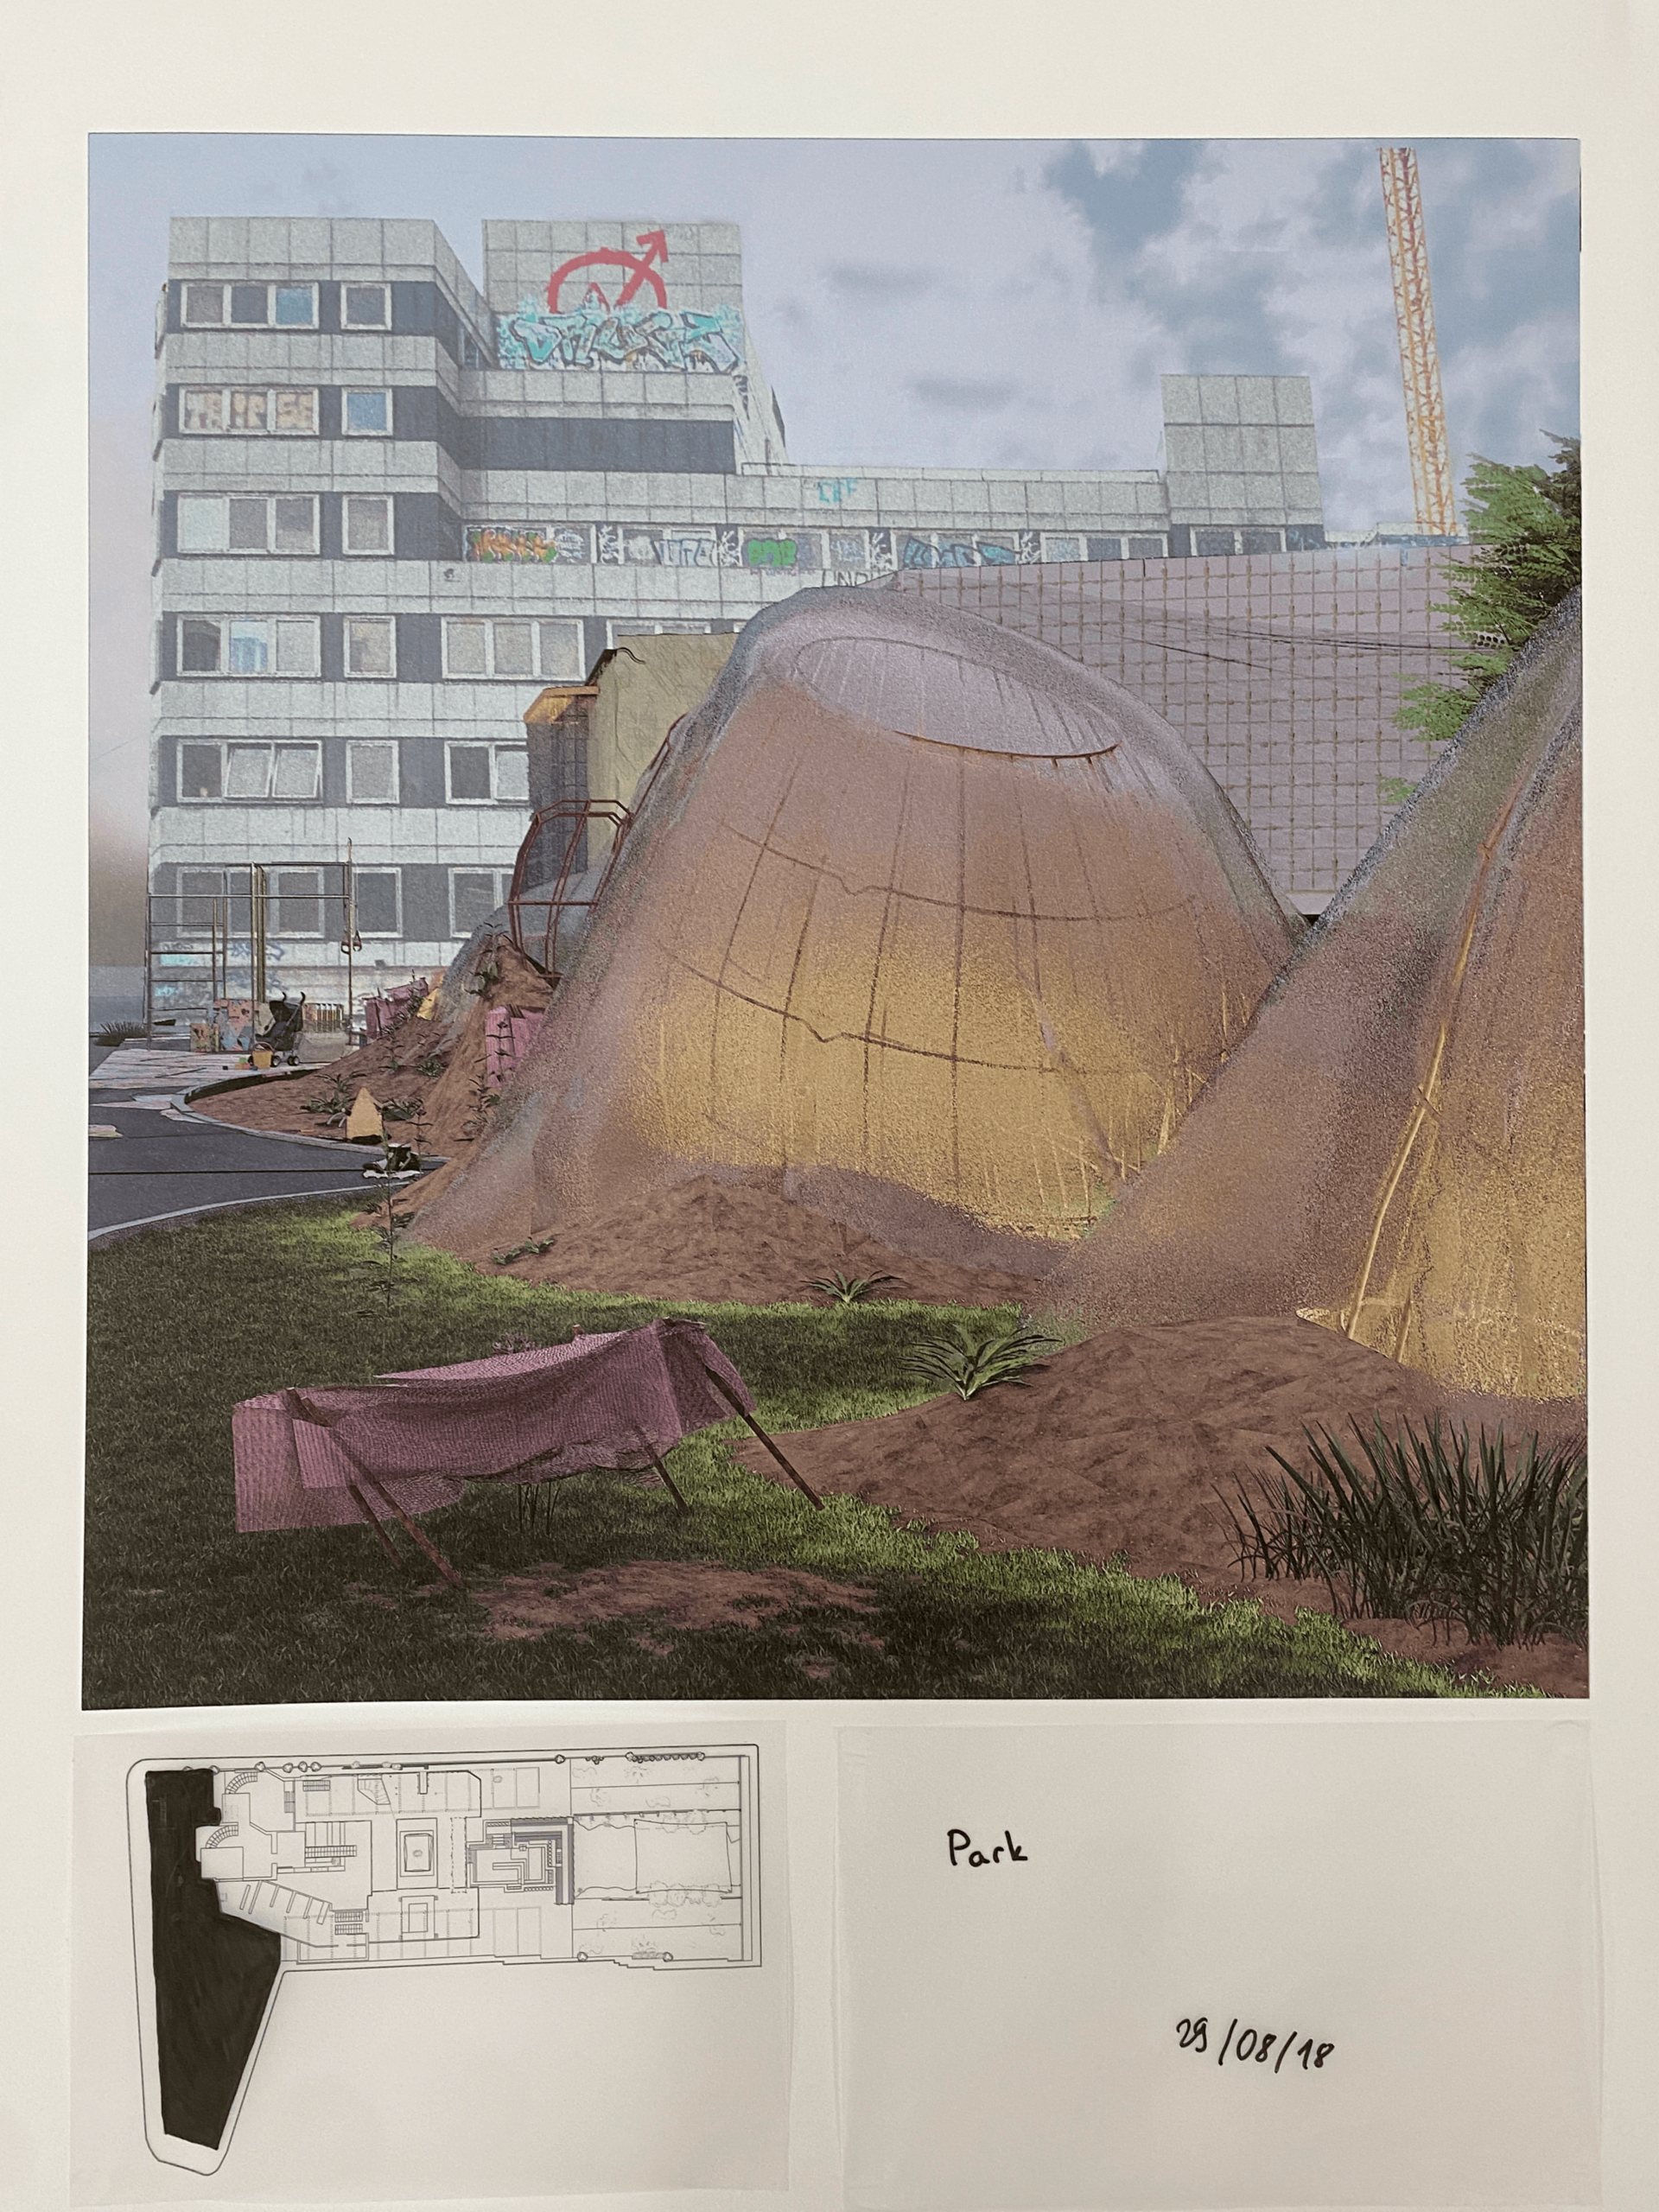 Image of transparent dome-shaped tent-like structures erected in front of a graffitied block of flats, with an aerial plan and a handwritten label, below it.